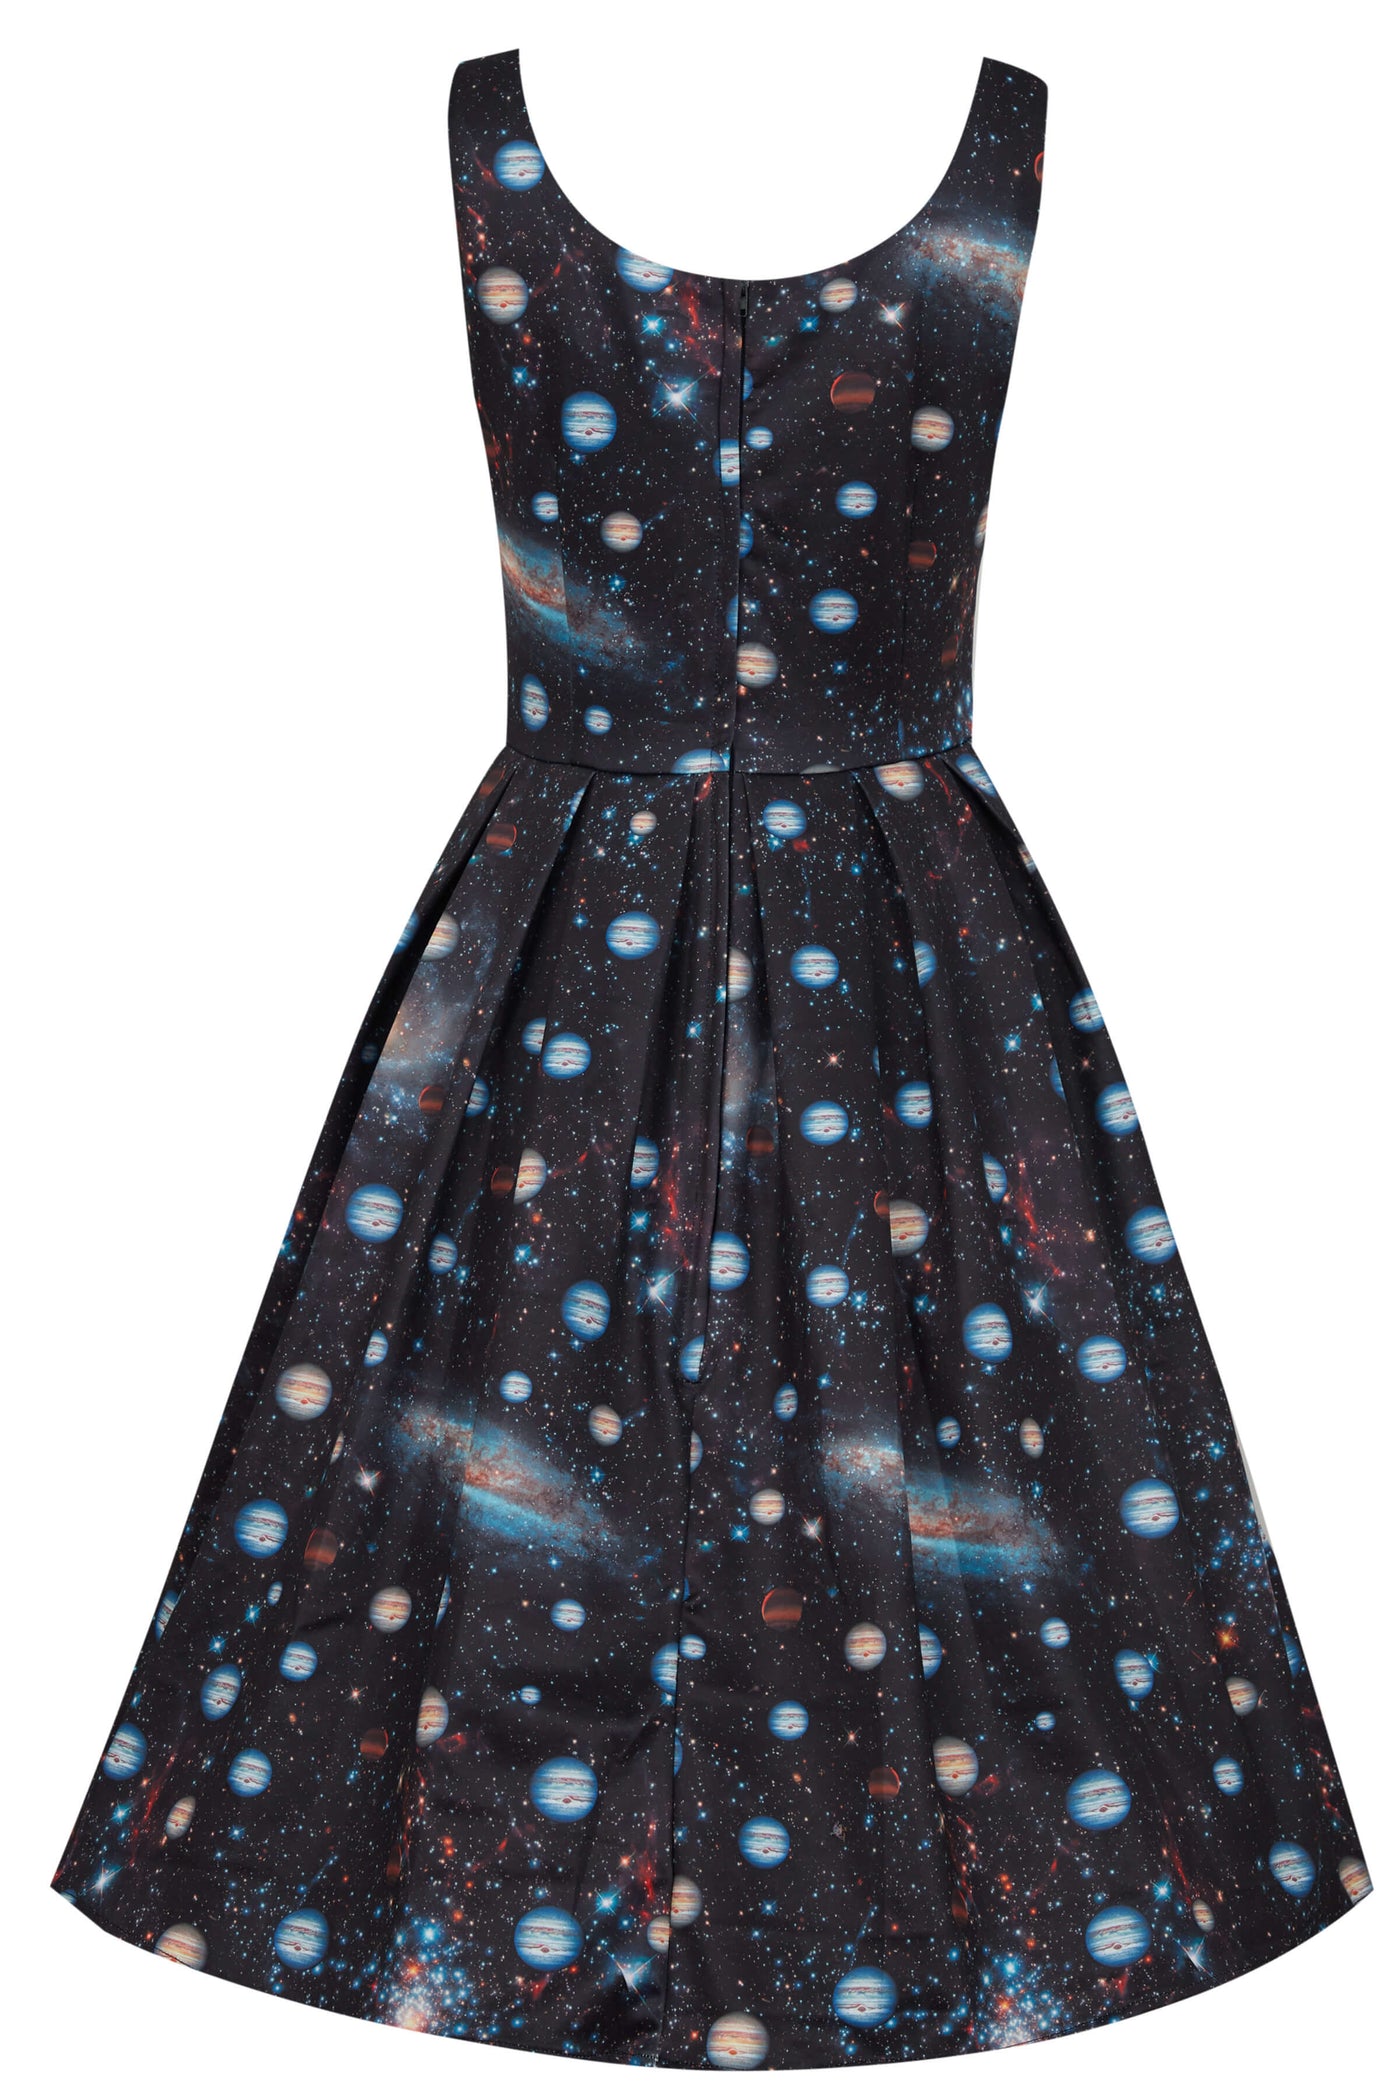 Universe Galaxy Space Print Dress With Pockets back view